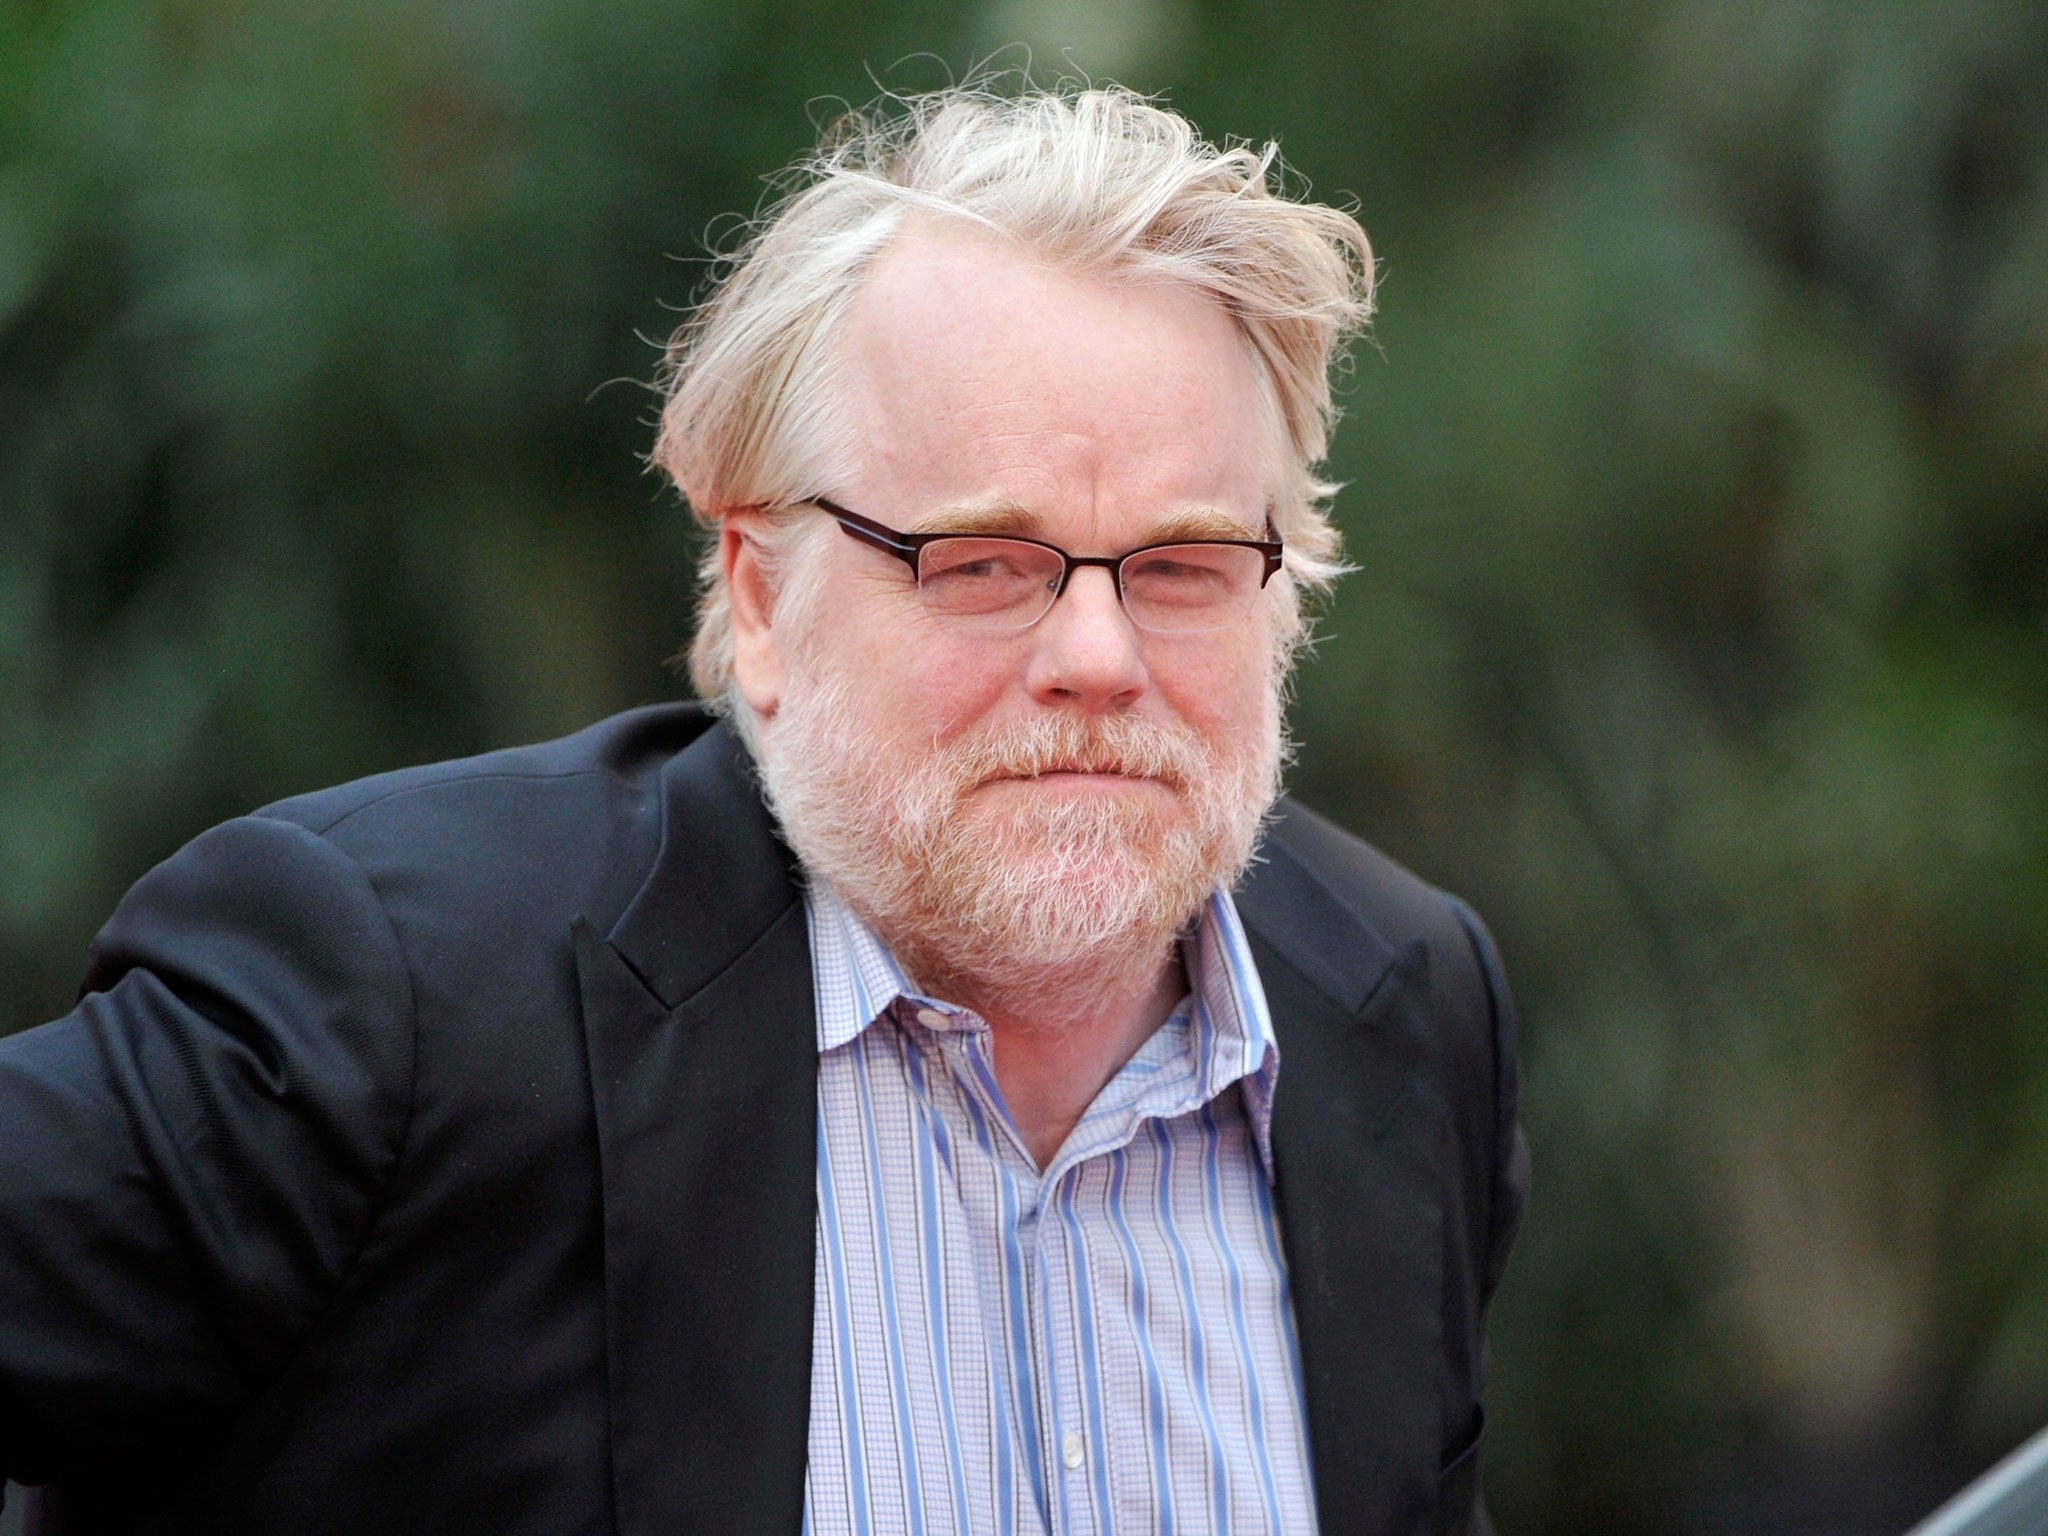 Philip Seymour Hoffman, who was found dead in his New York apartment, apparently from an overdose, had a history of drug abuse going back to his early 20s